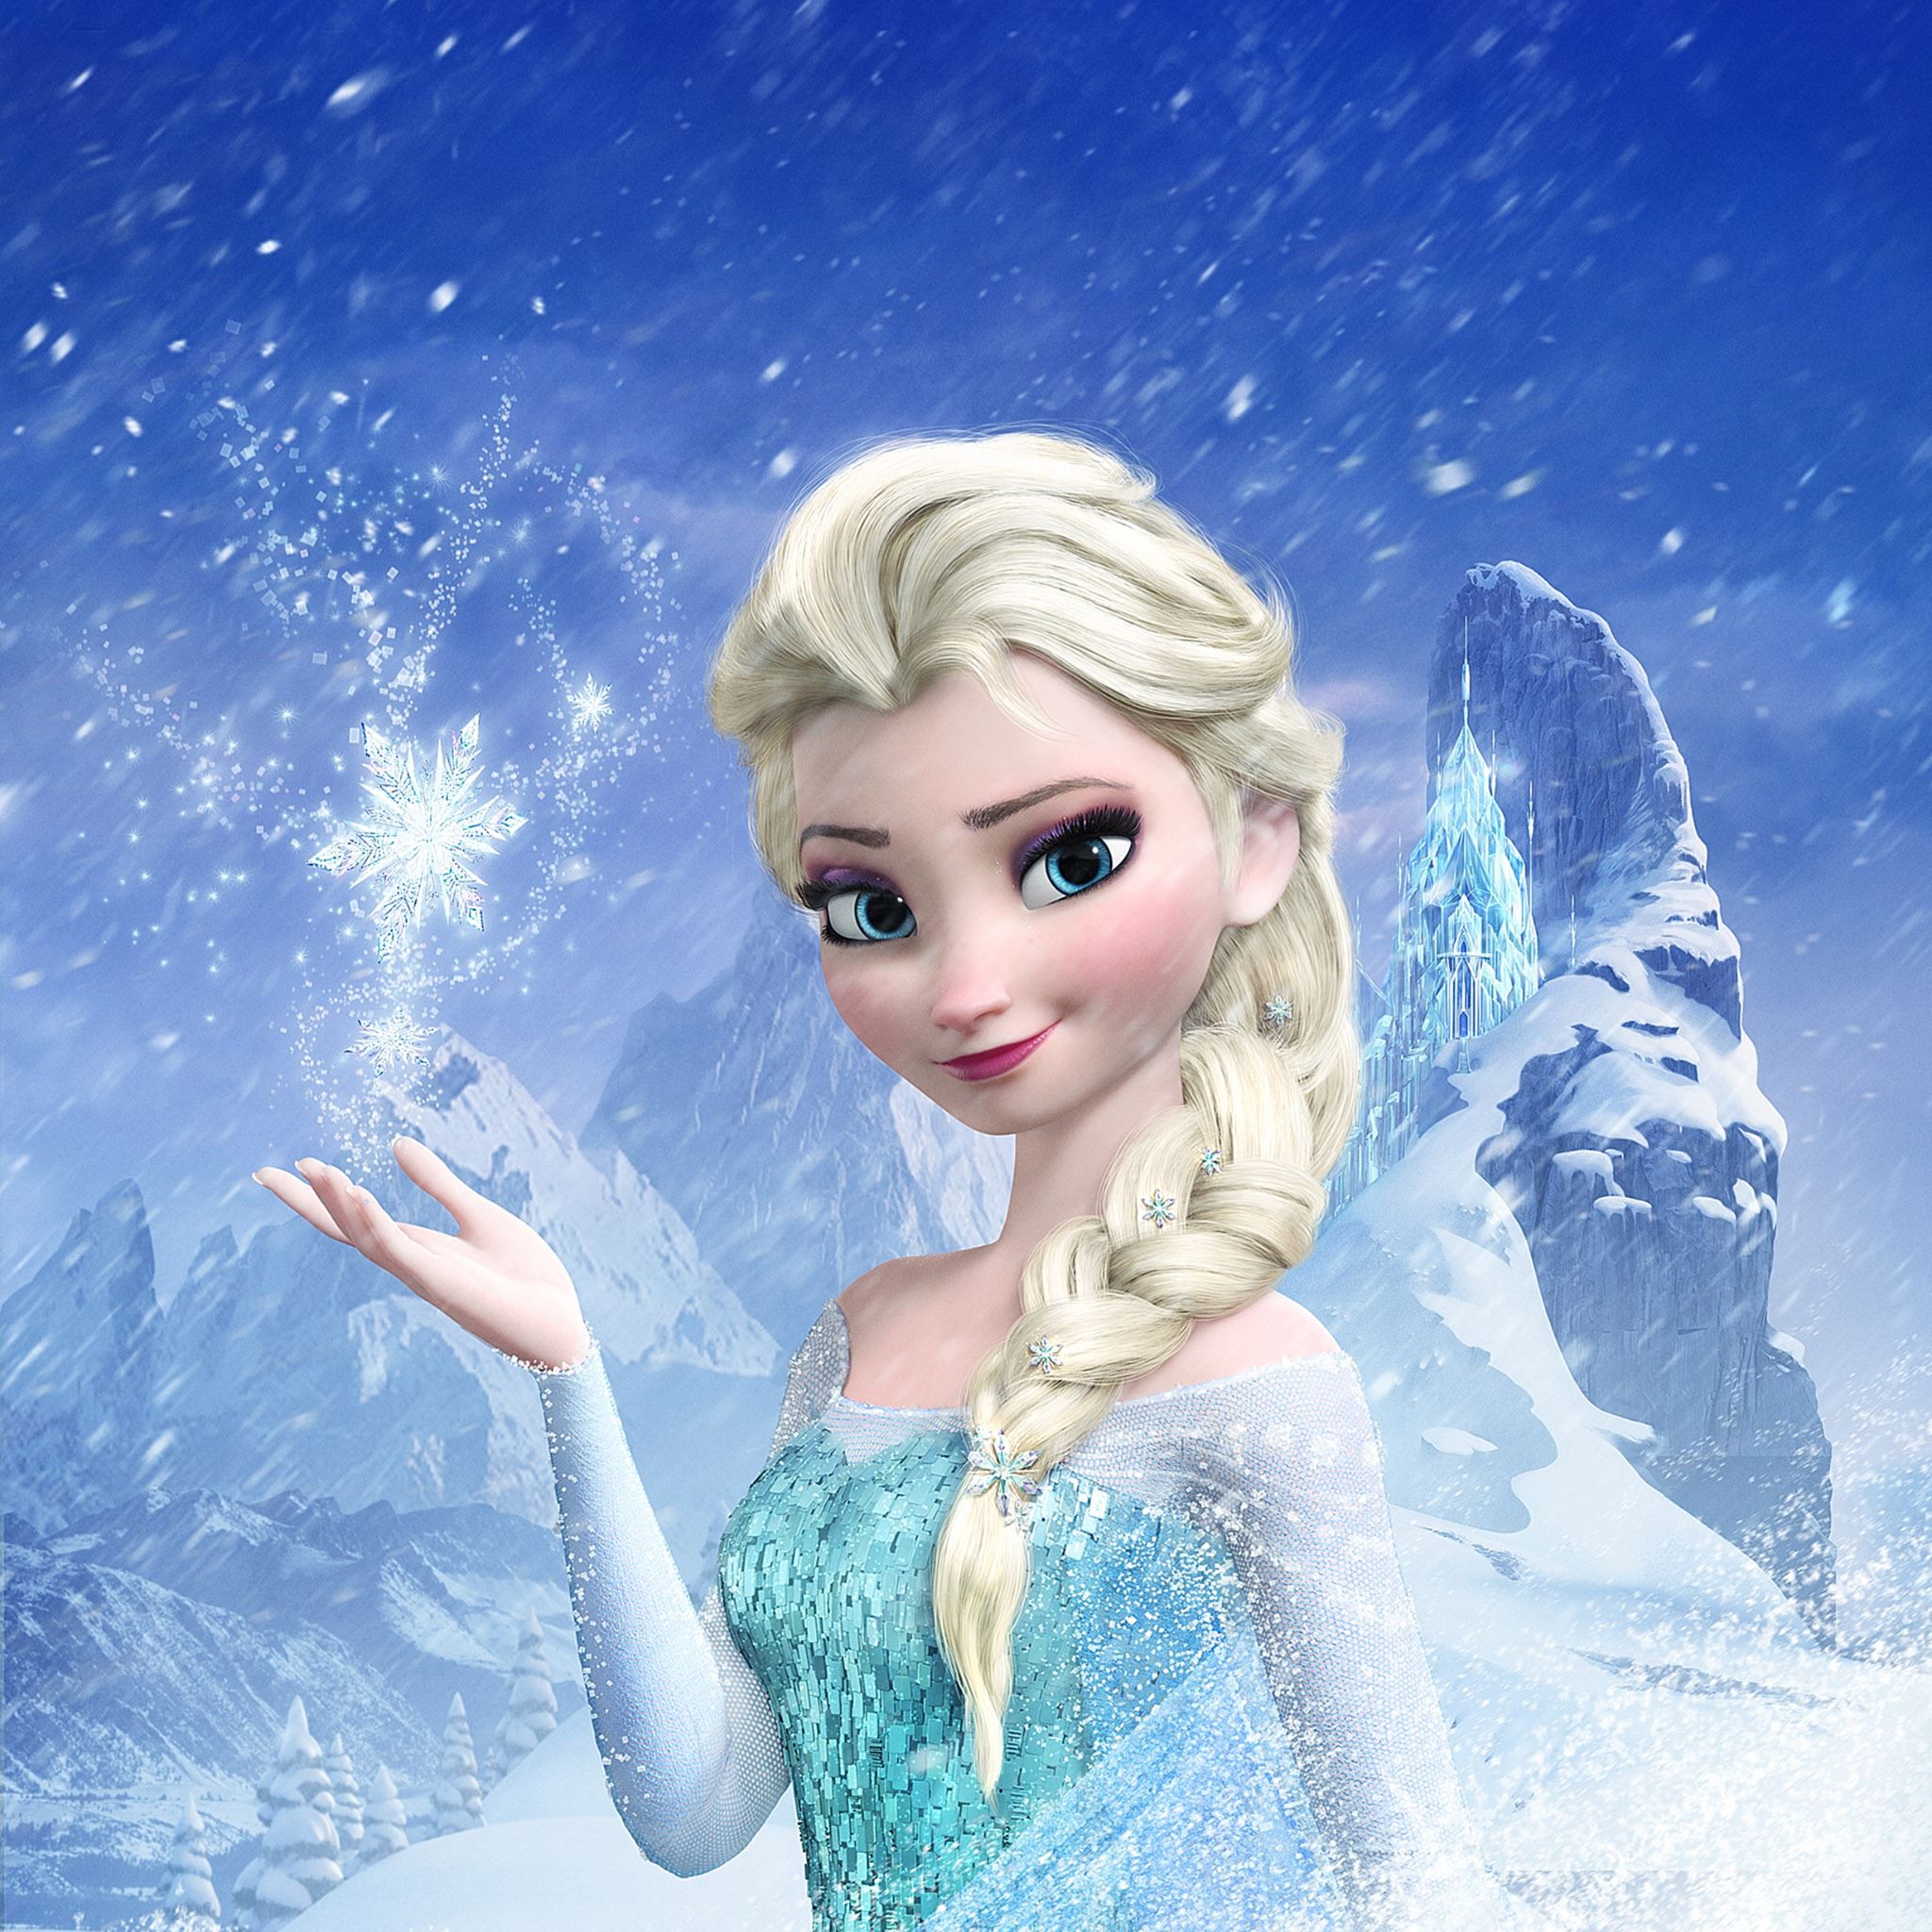 Frozen for ios download